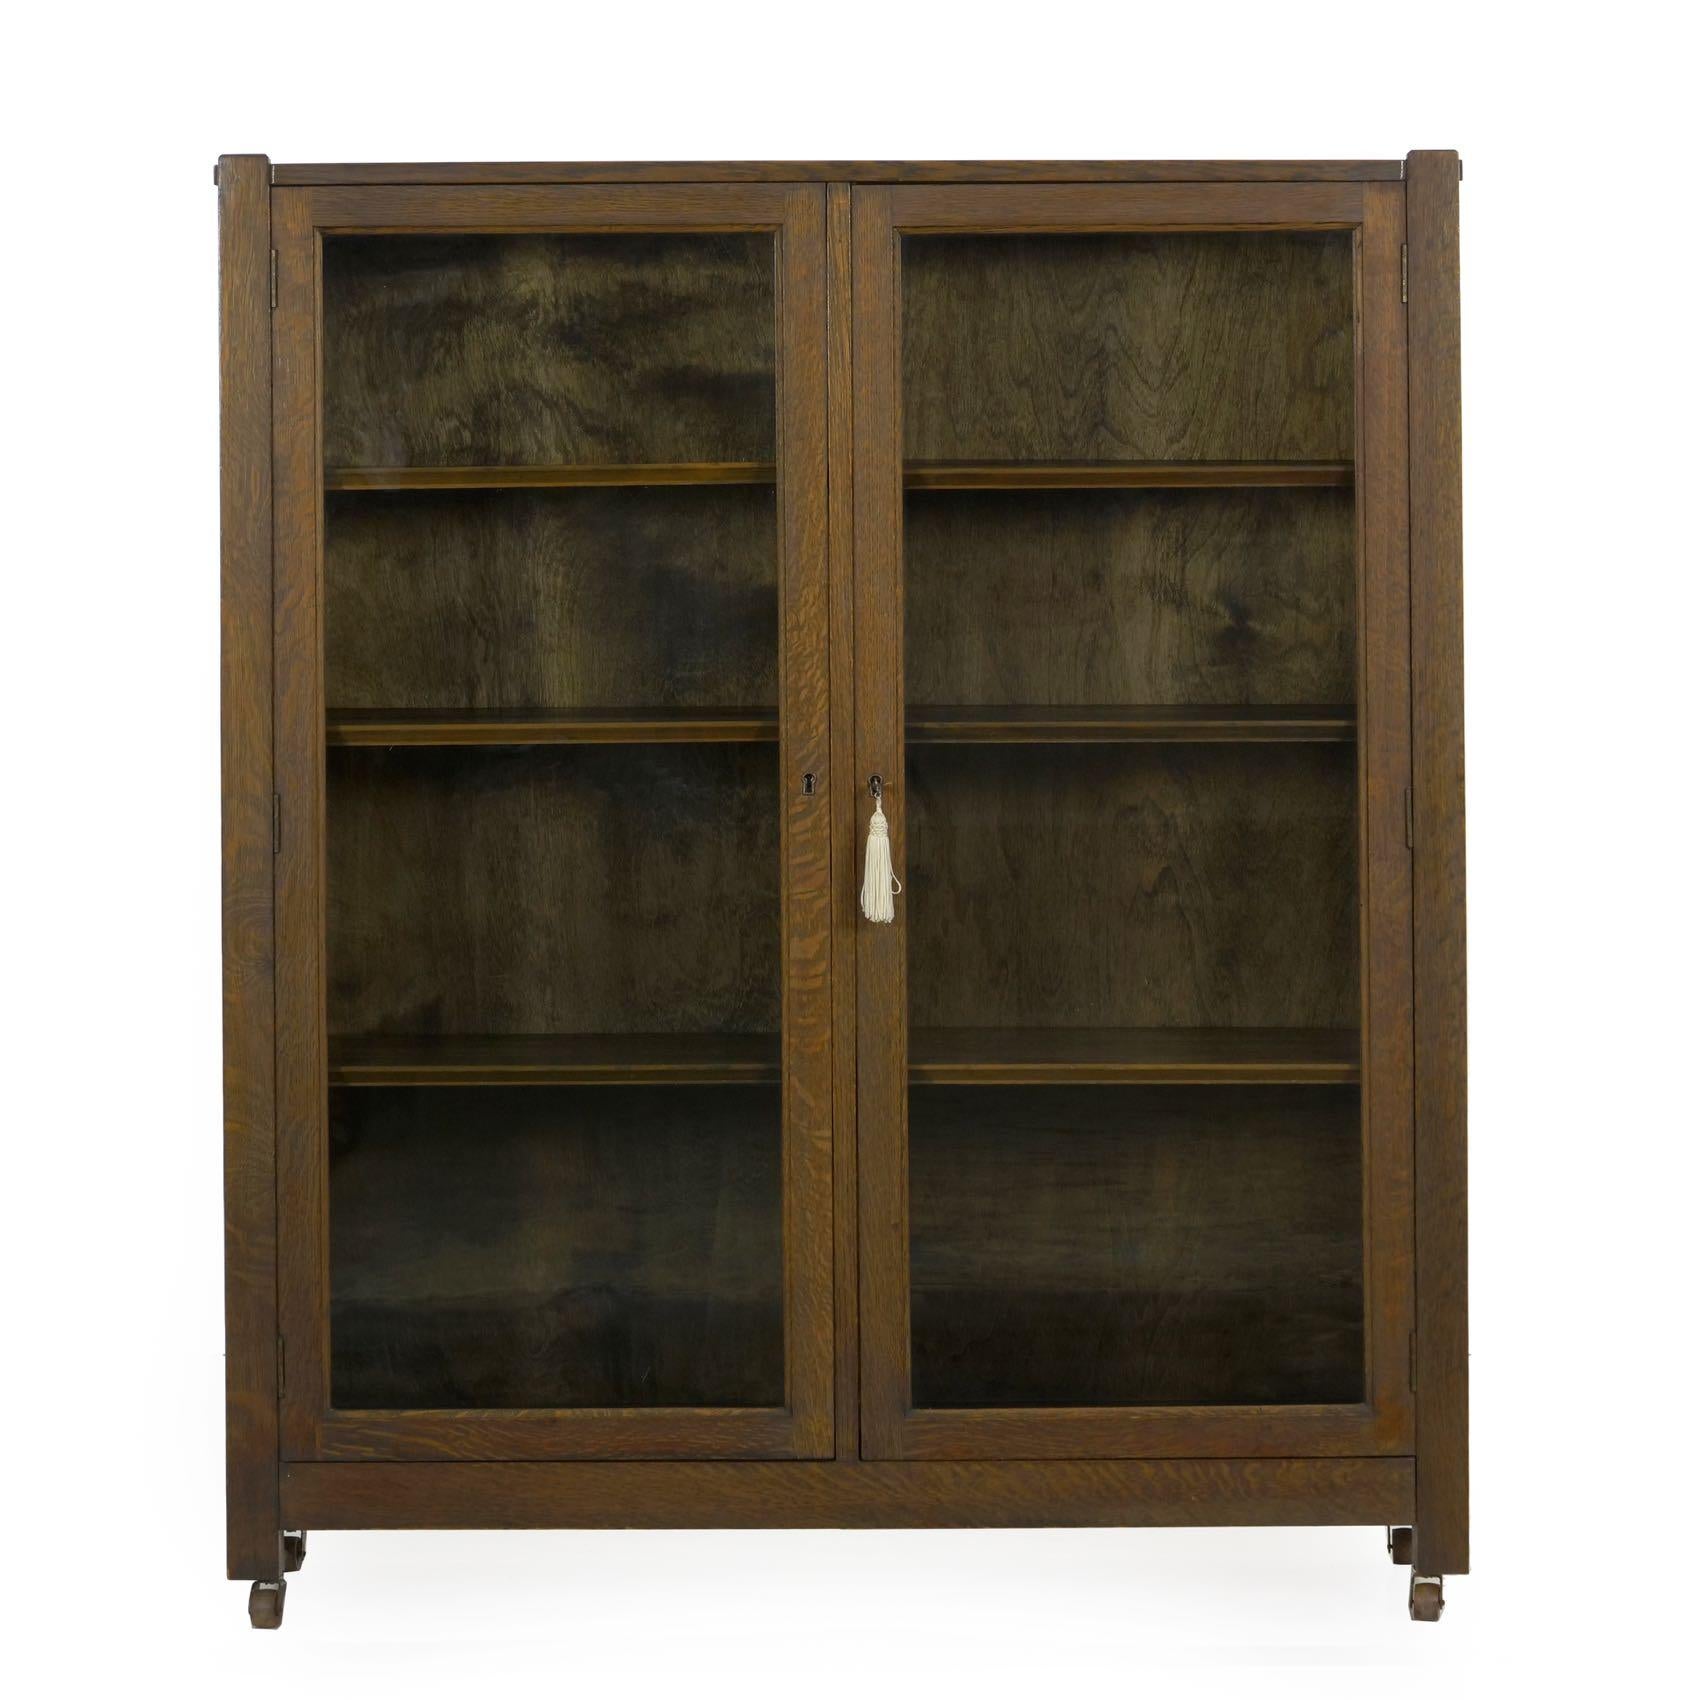 This well constructed cabinet is typical of the period, a tidy and austere form that highlights the beautiful quarter-sawn oak. The pair of hinged doors swing outward to give access to three shelves on either side. One glass pane is replaced while